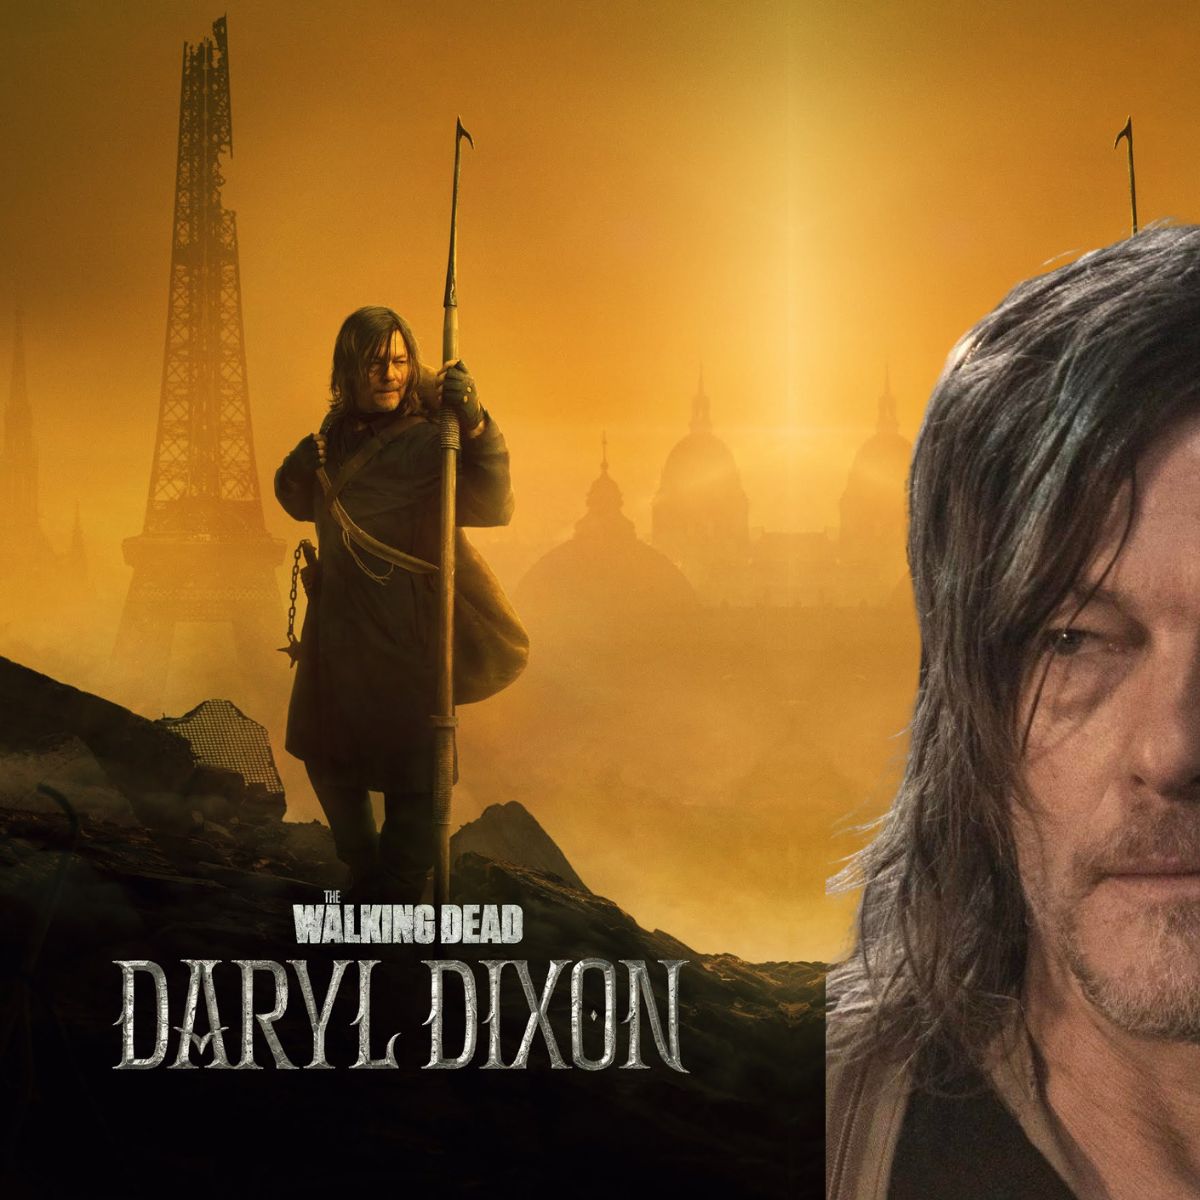 The Walking Dead: Daryl Dixon – A Riveting Journey Across Zombie-Infested France